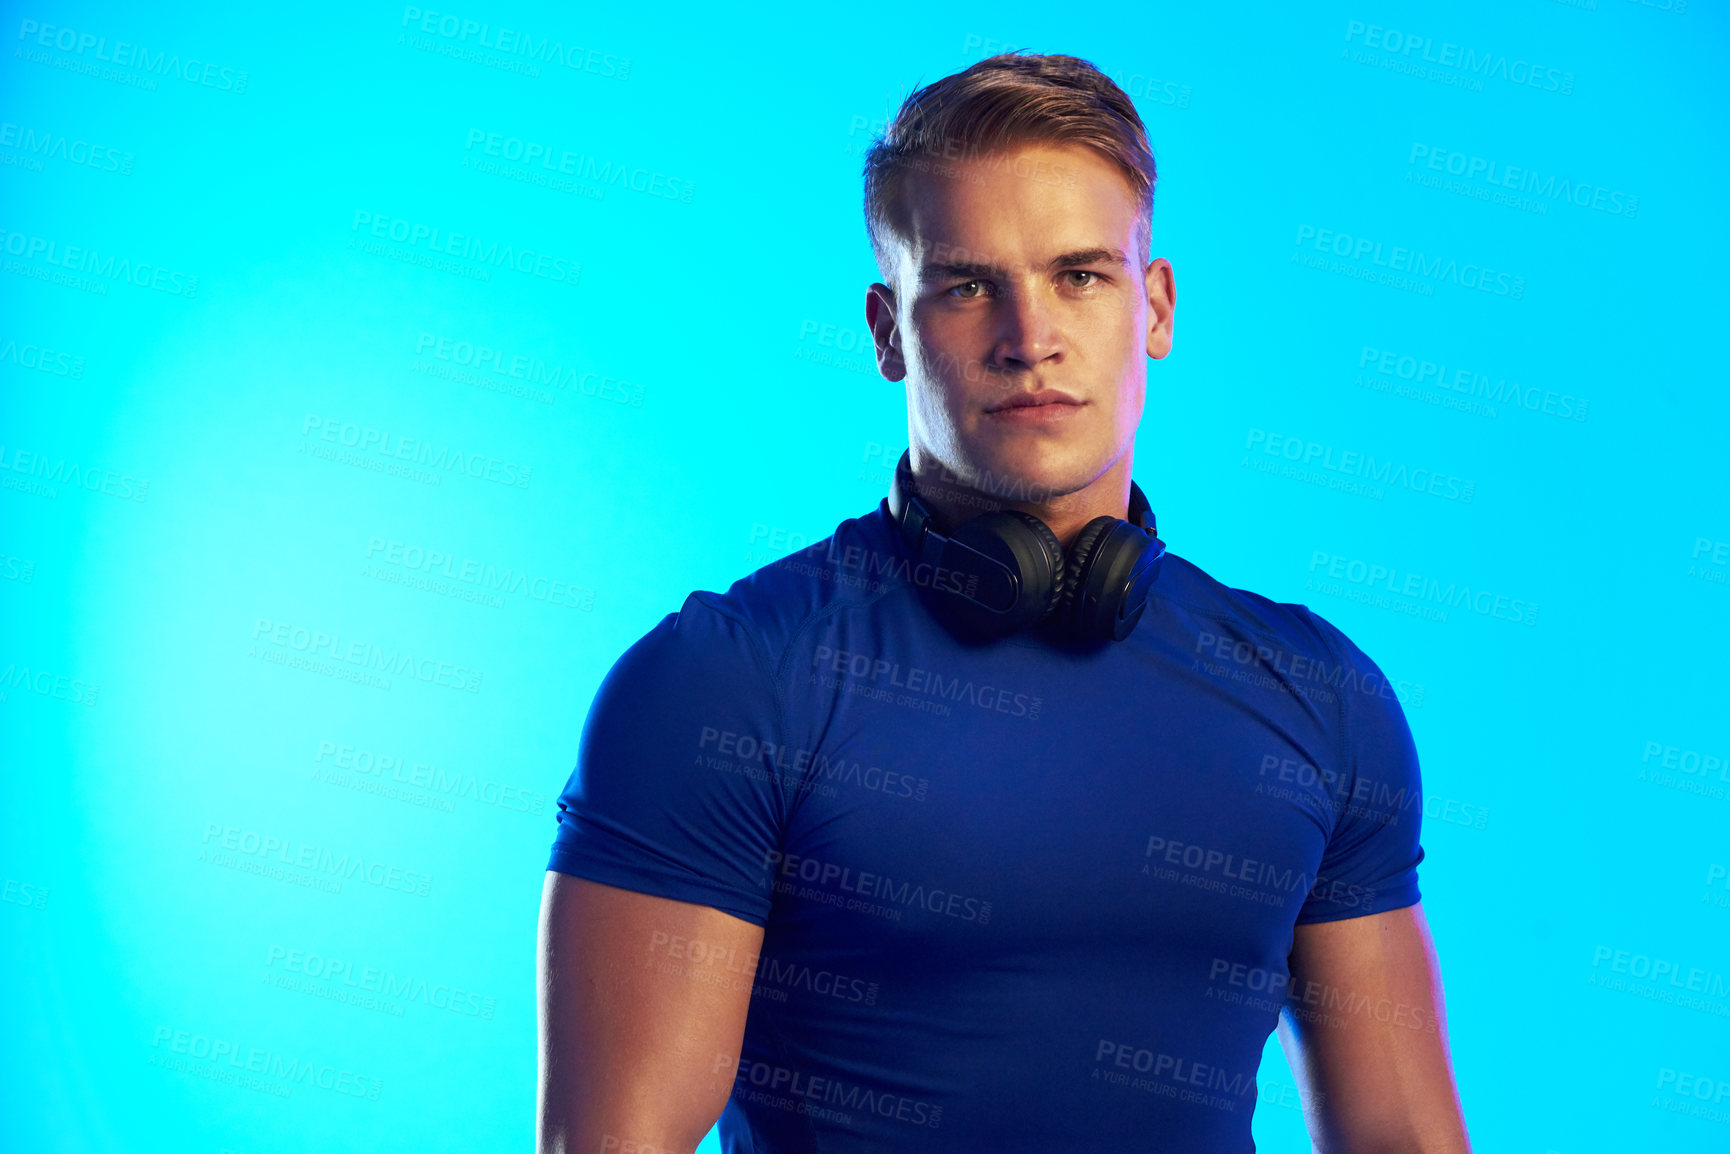 Buy stock photo Studio portrait of a handsome young male athlete posing with headphones around his neck against a blue background